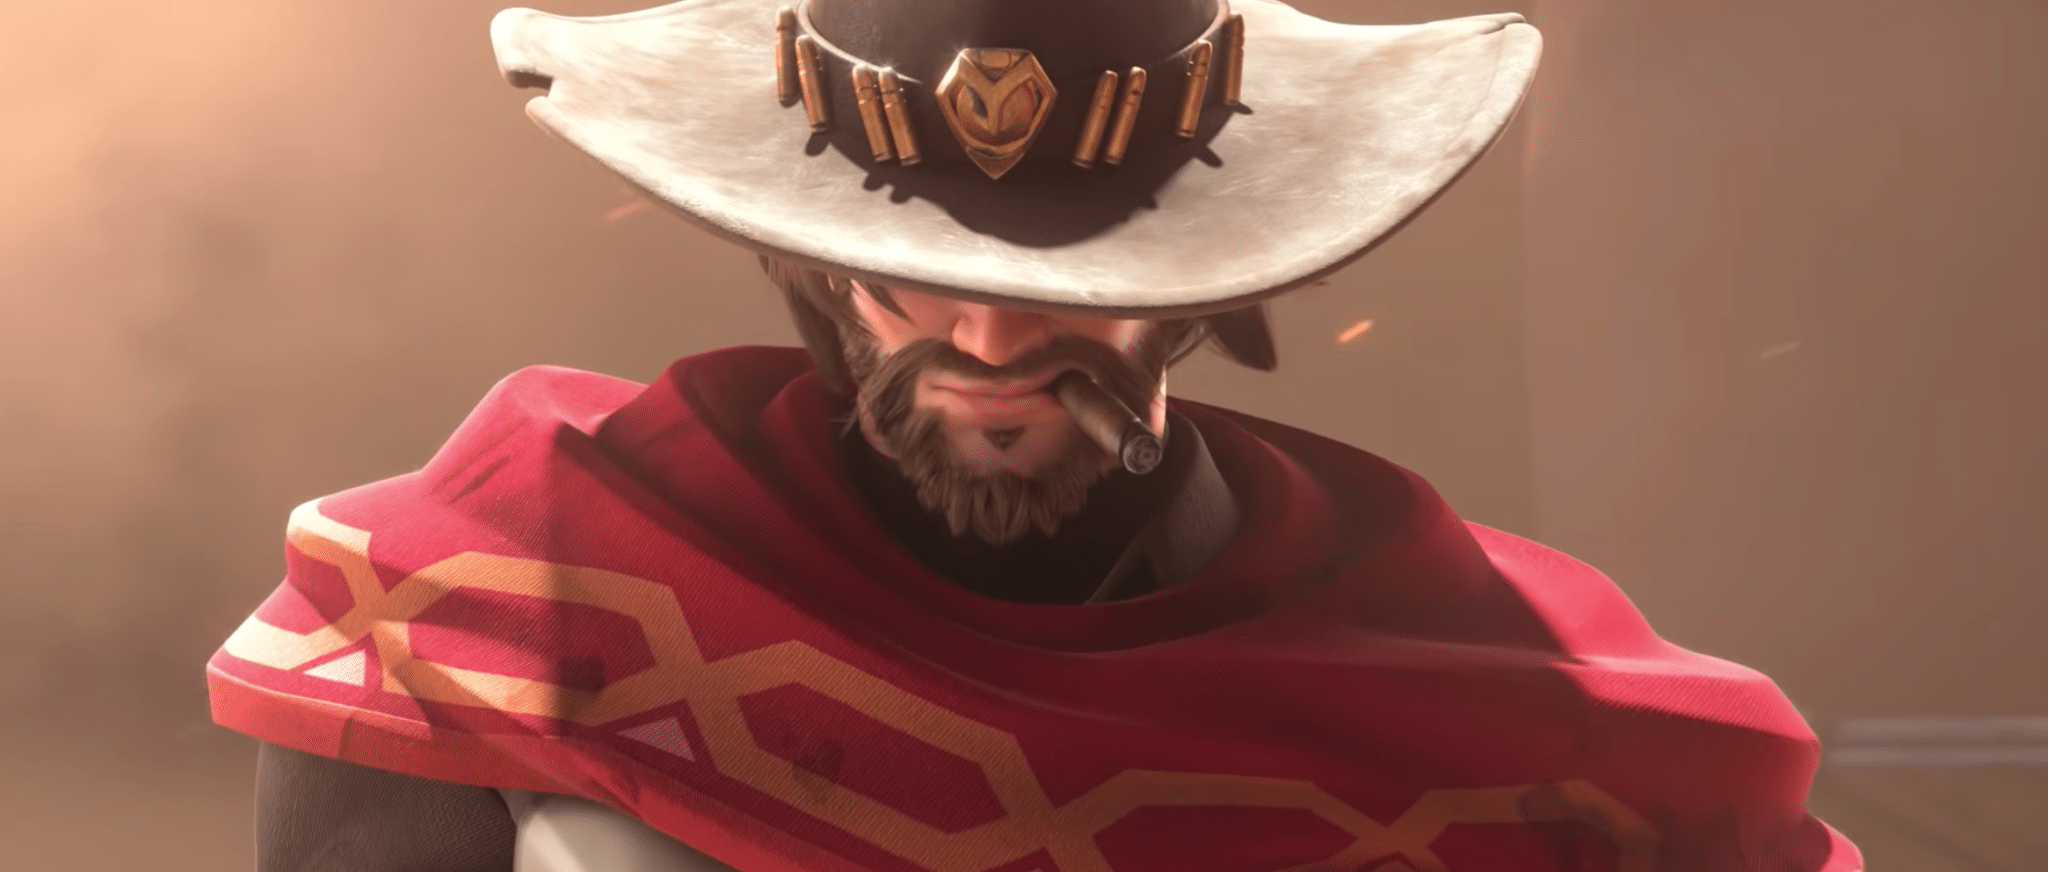 Is mccree gay